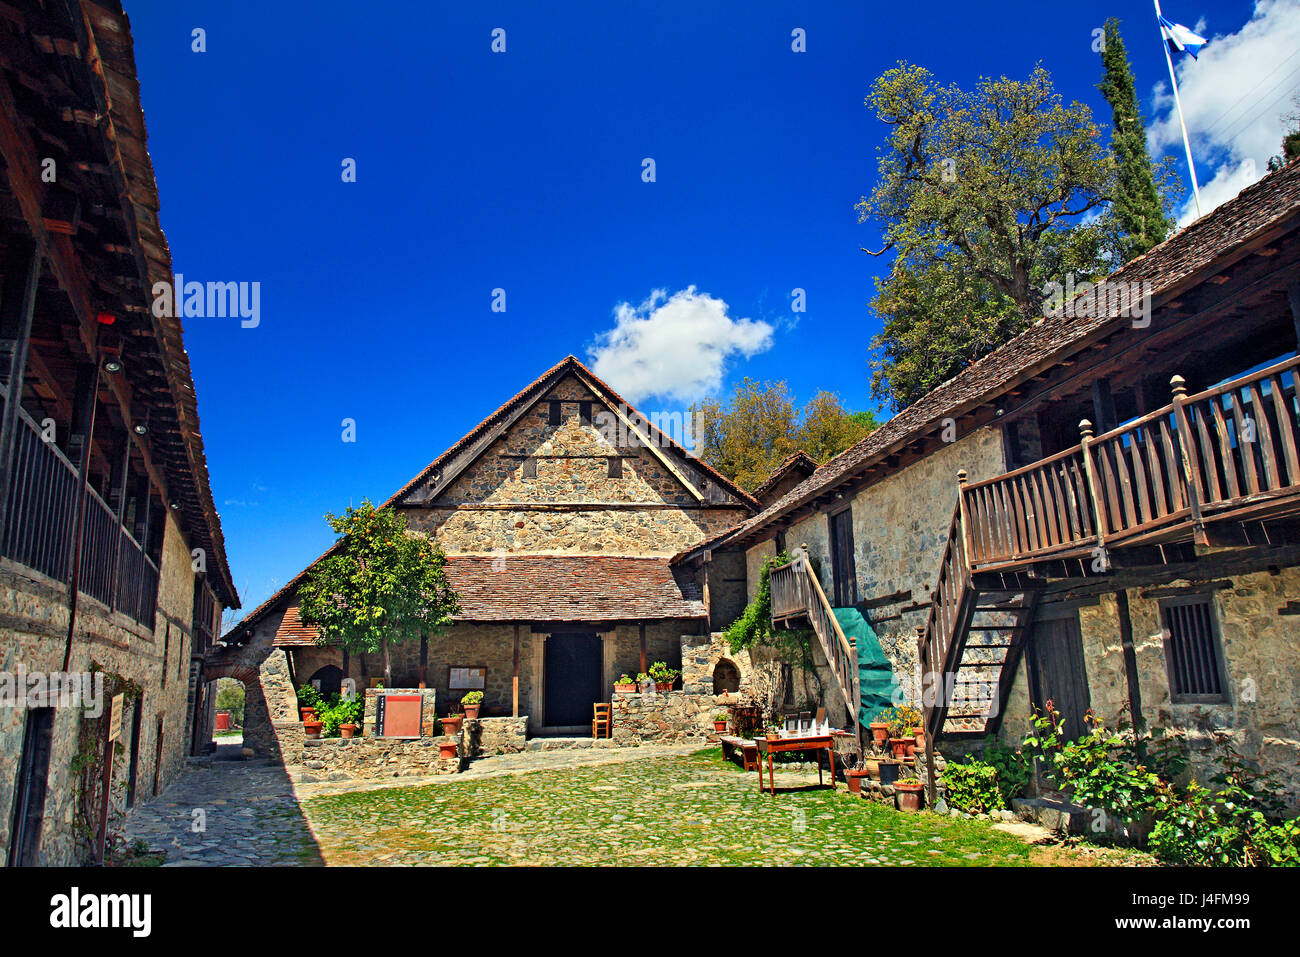 St Ioannis High Resolution Stock Photography and Images - Alamy